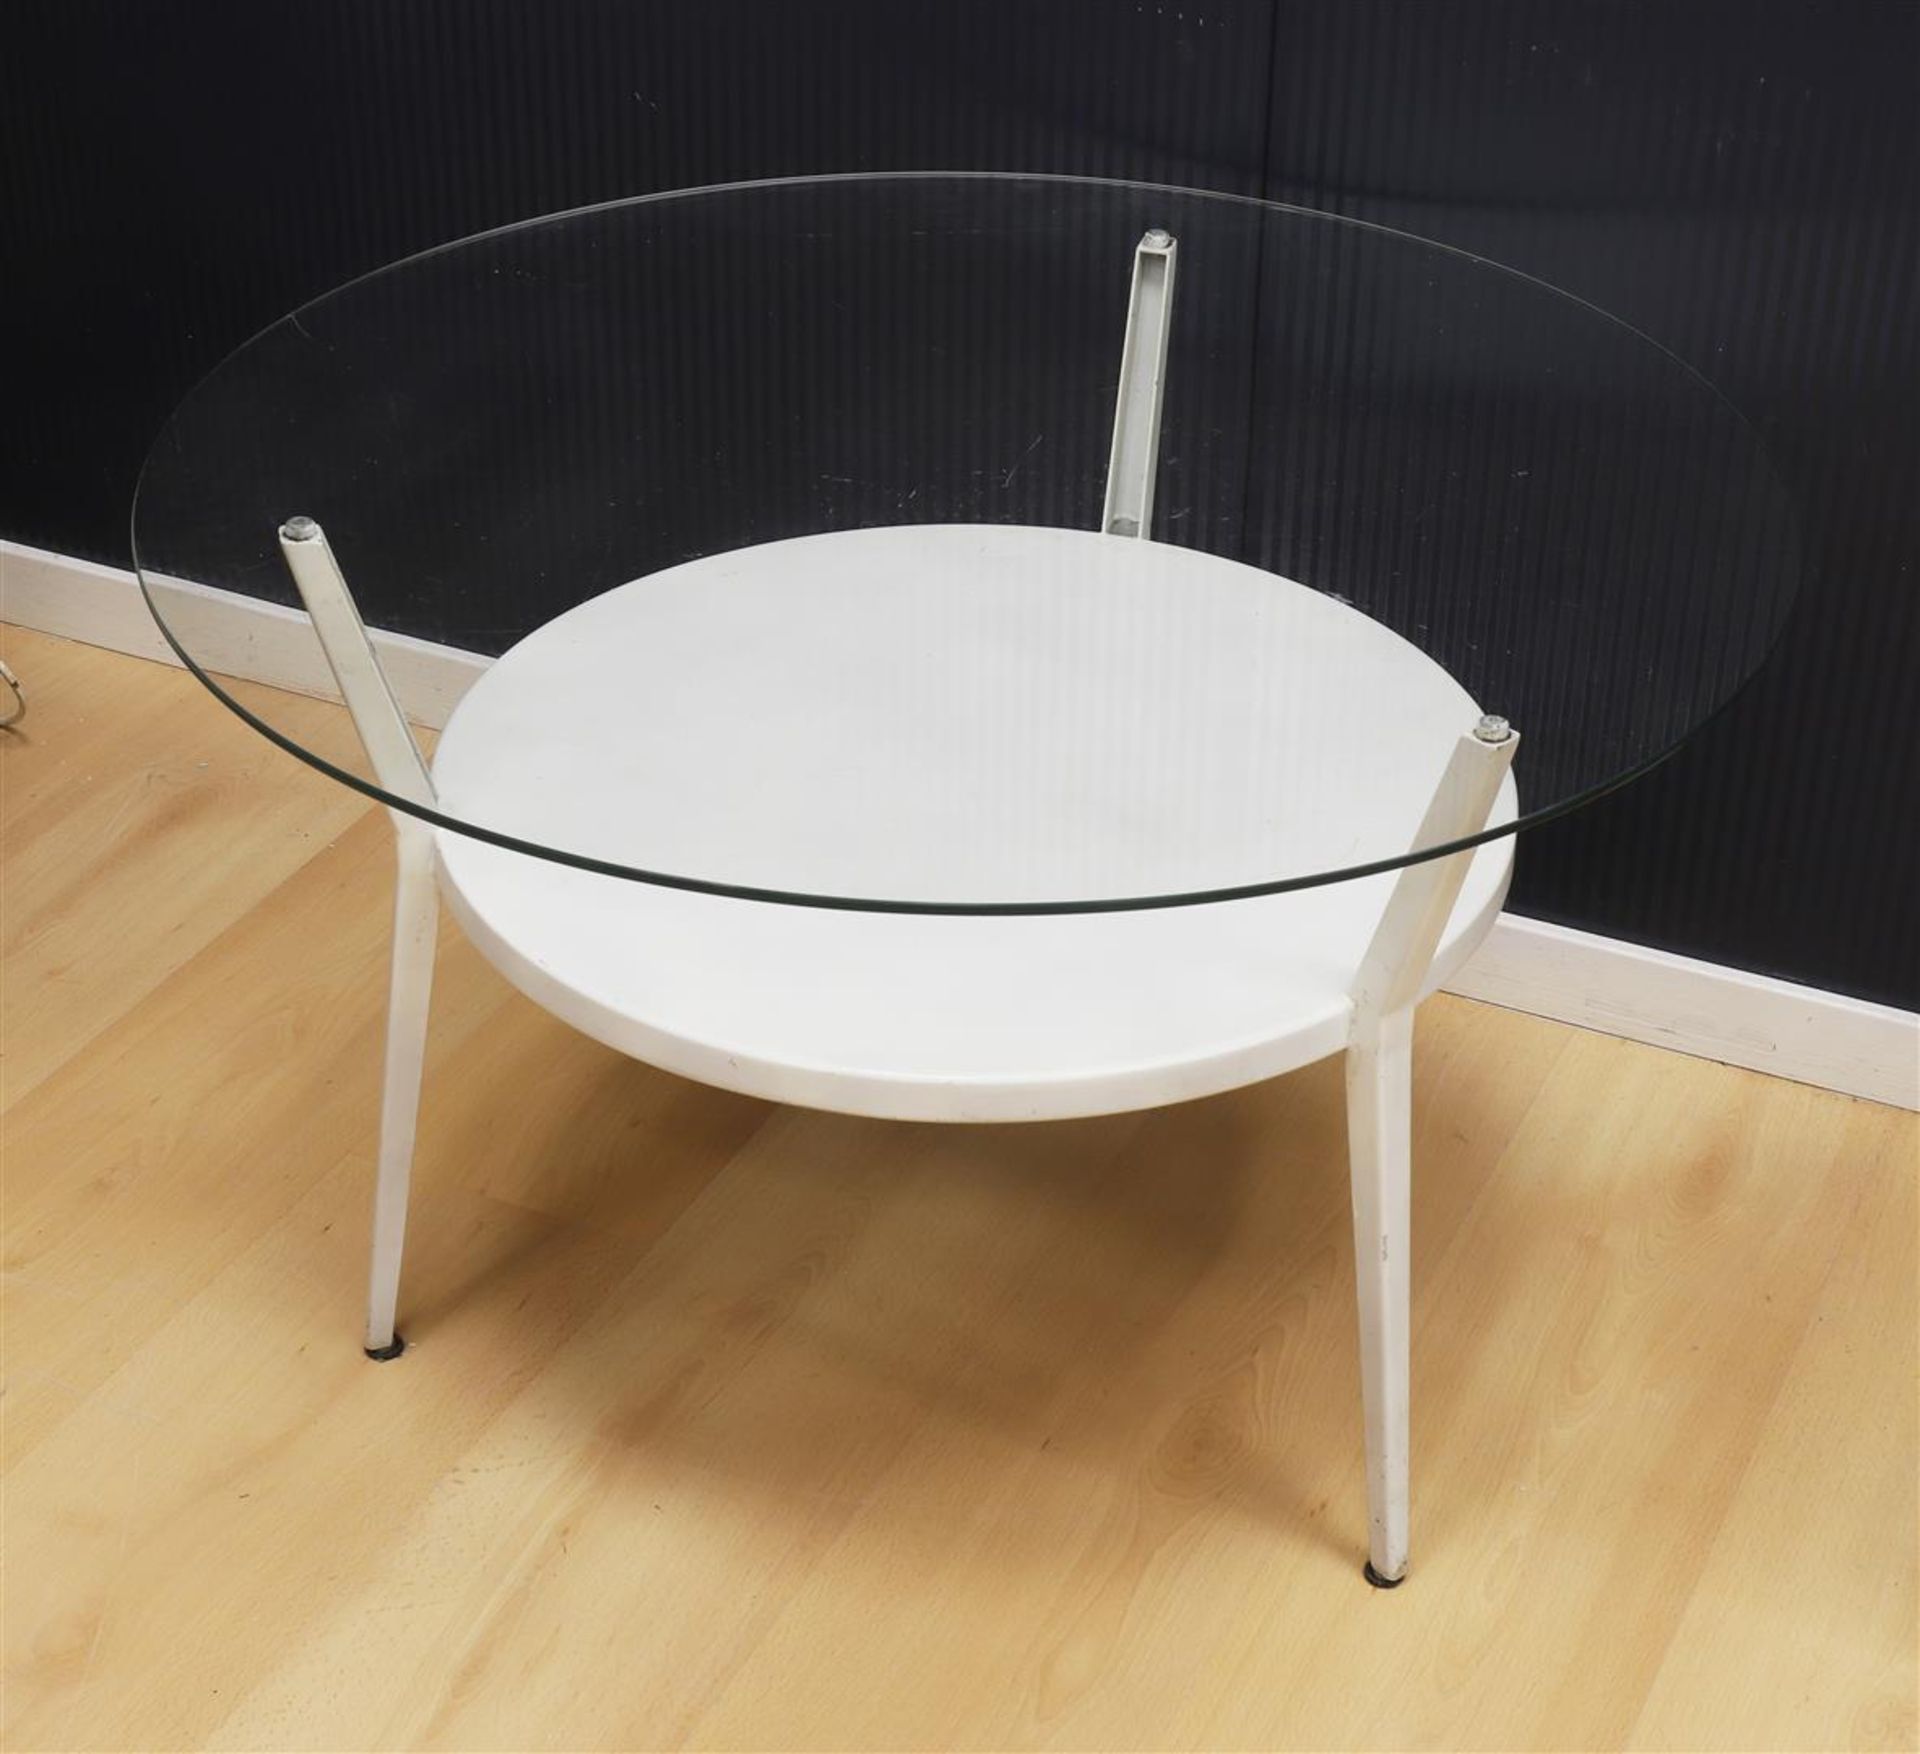 A metal coffee table 'roundabout', design: Friso Kramer 1959